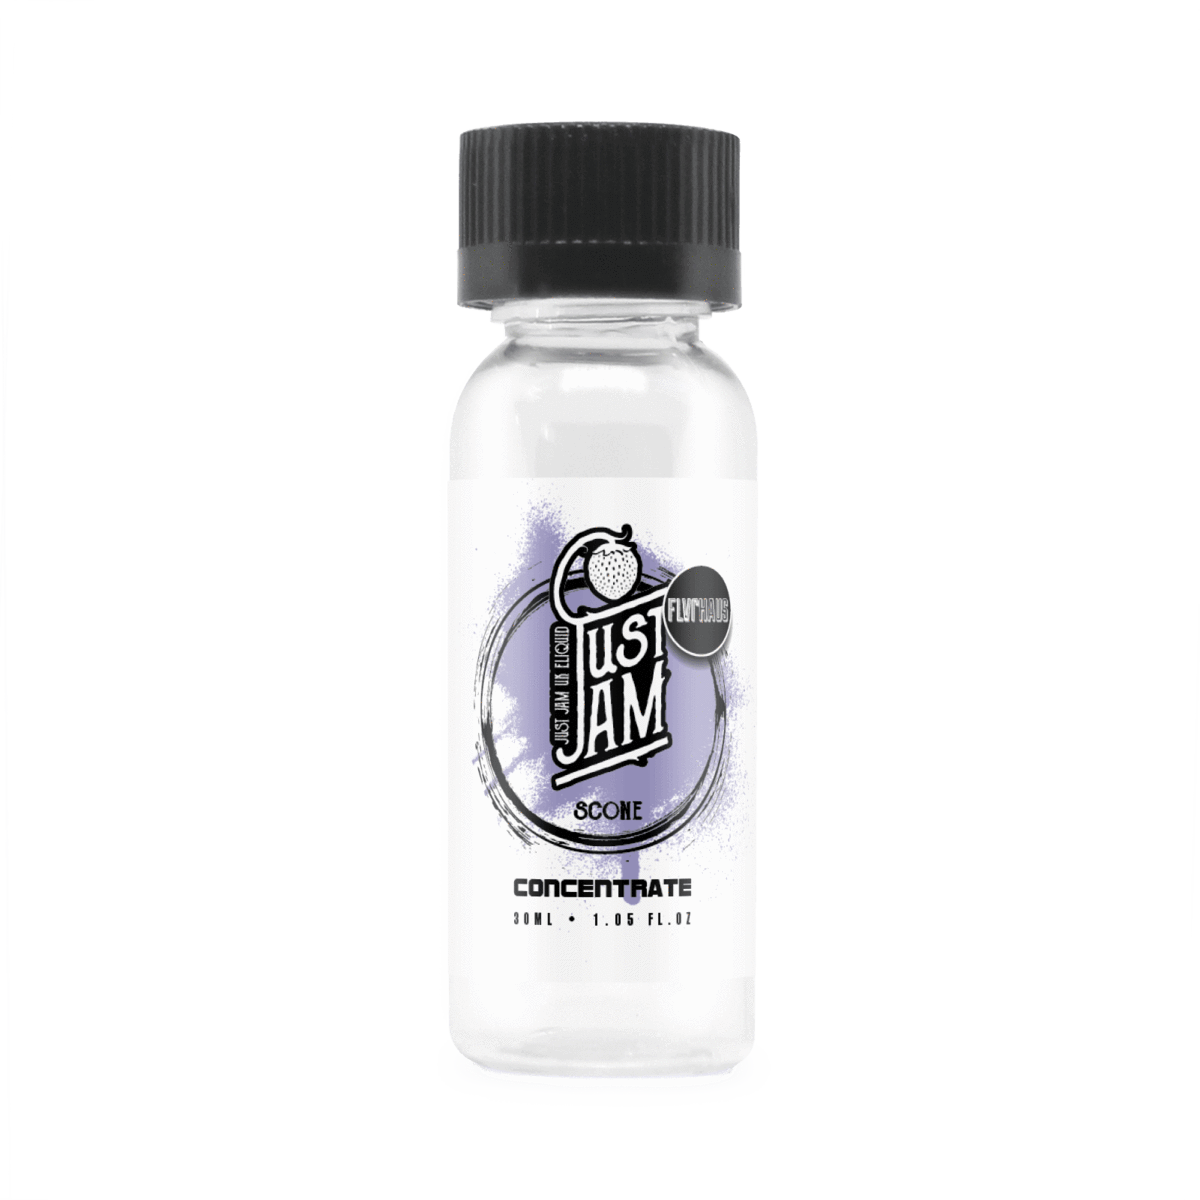 Scone Concentrate E-Liquid by Just Jam 30ml